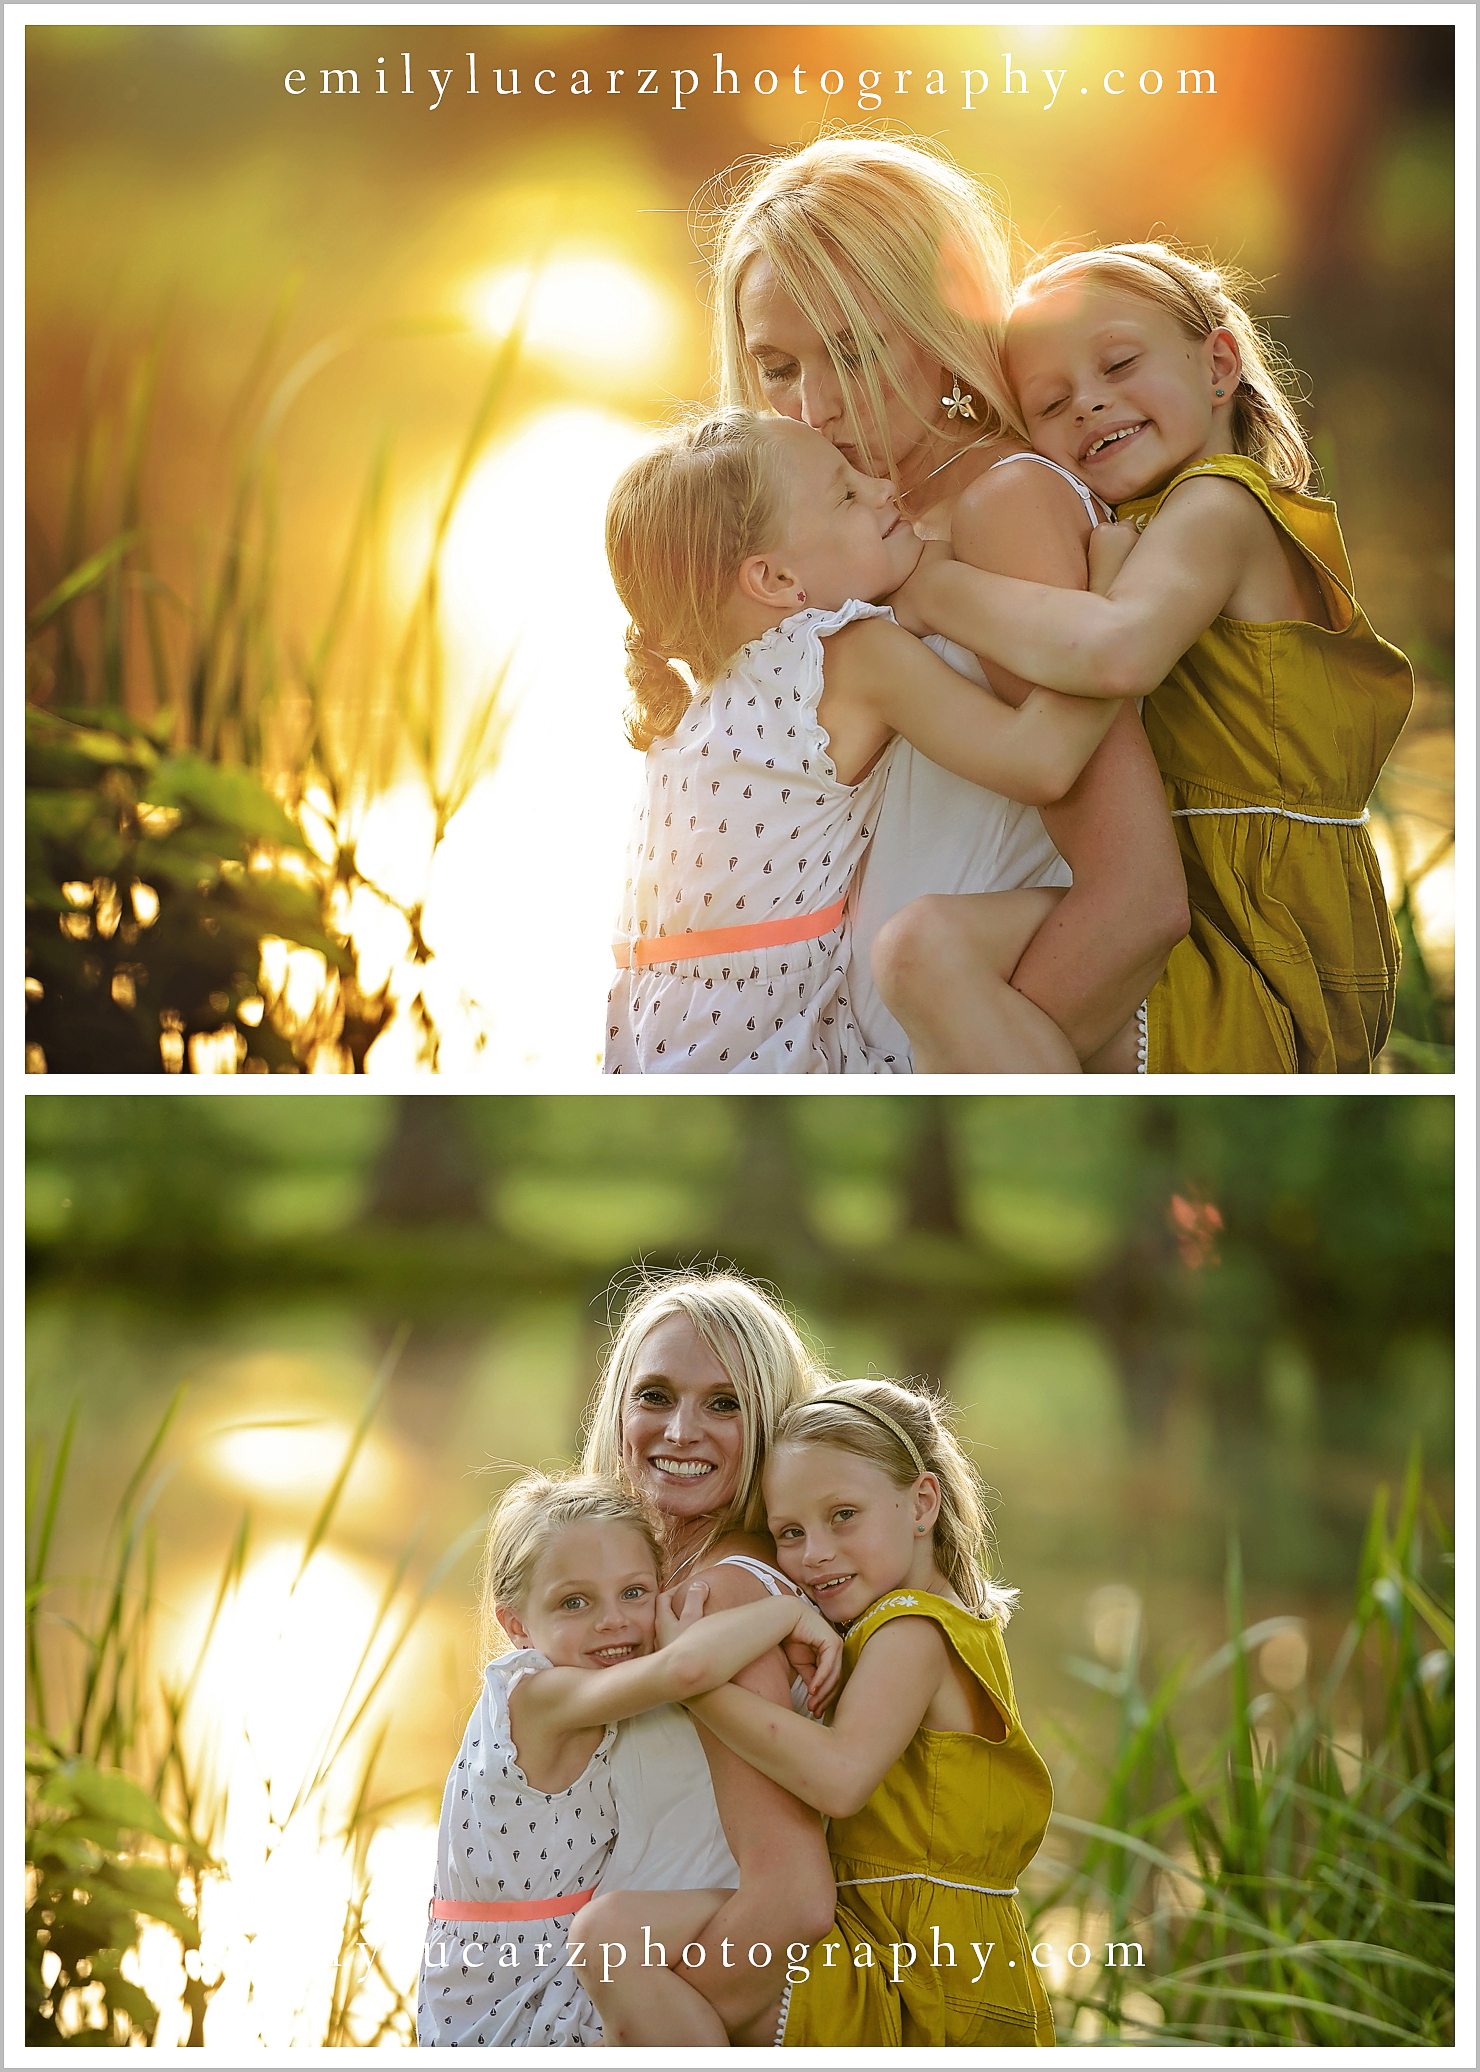 St. Louis family photography